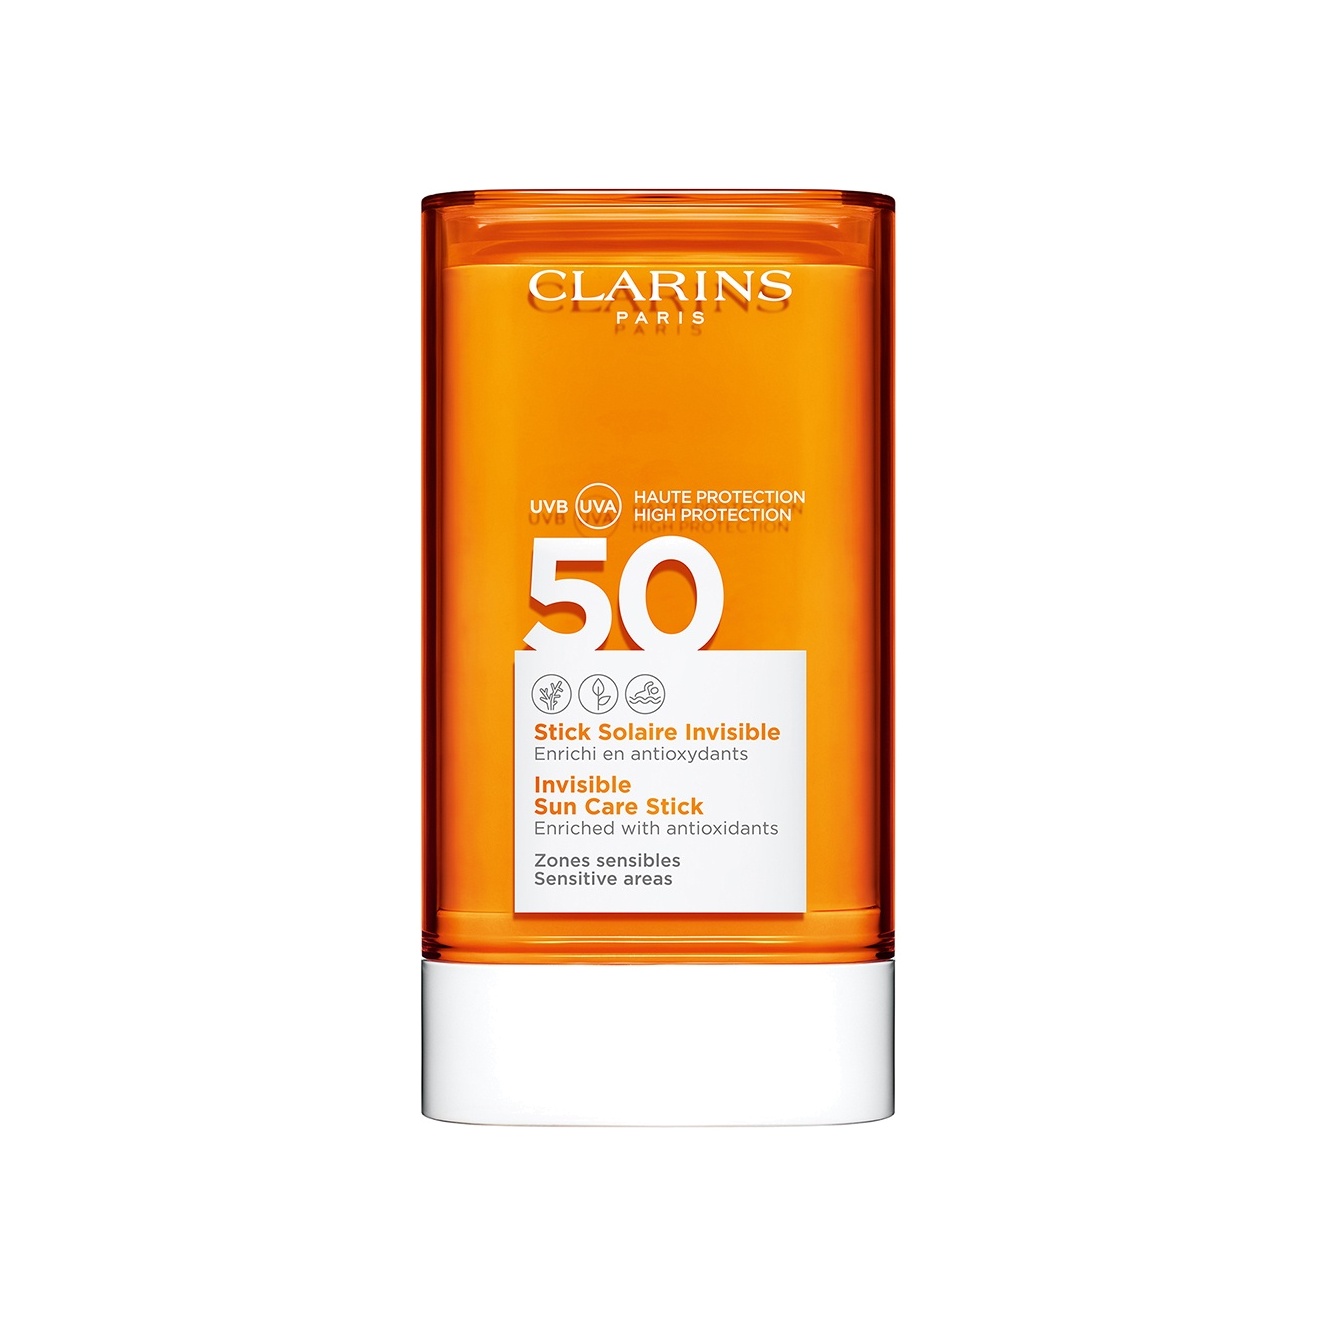 Солнцезащитный стик для лица spf. Clarins Invisible Sun Care Stick SPF 50. Clarins Dry Touch facial Sun Care Cream SPF 50+. Кларанс крем солнцезащитный SPF 50. Солнцезащита 50 SPF.